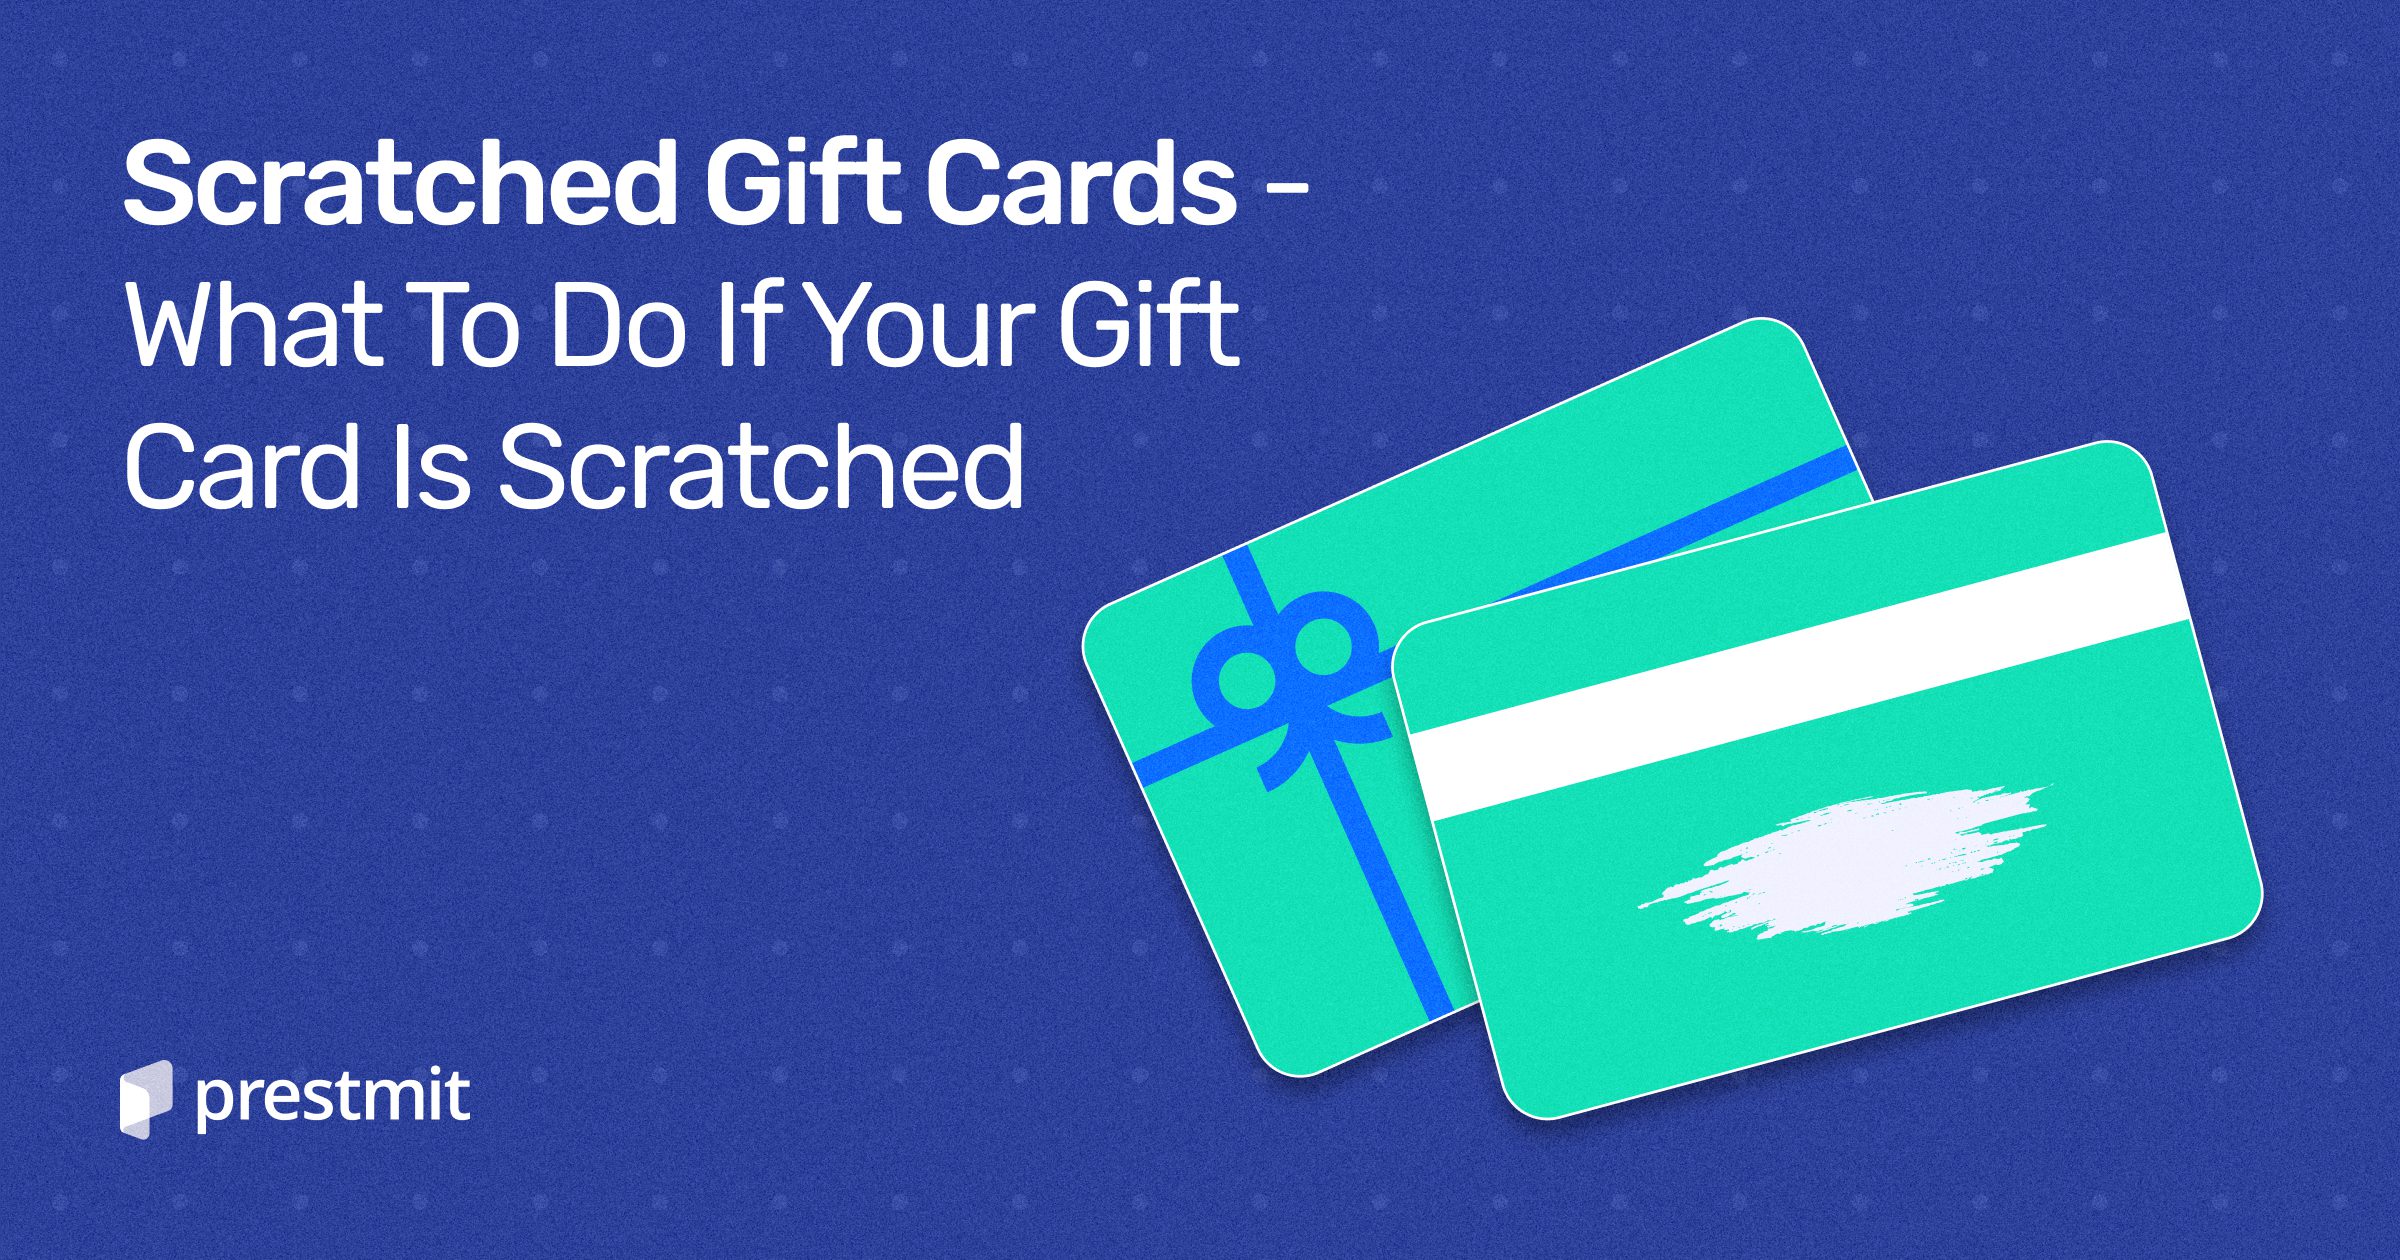 How to Activate a Gift Card: 3 Simple Methods